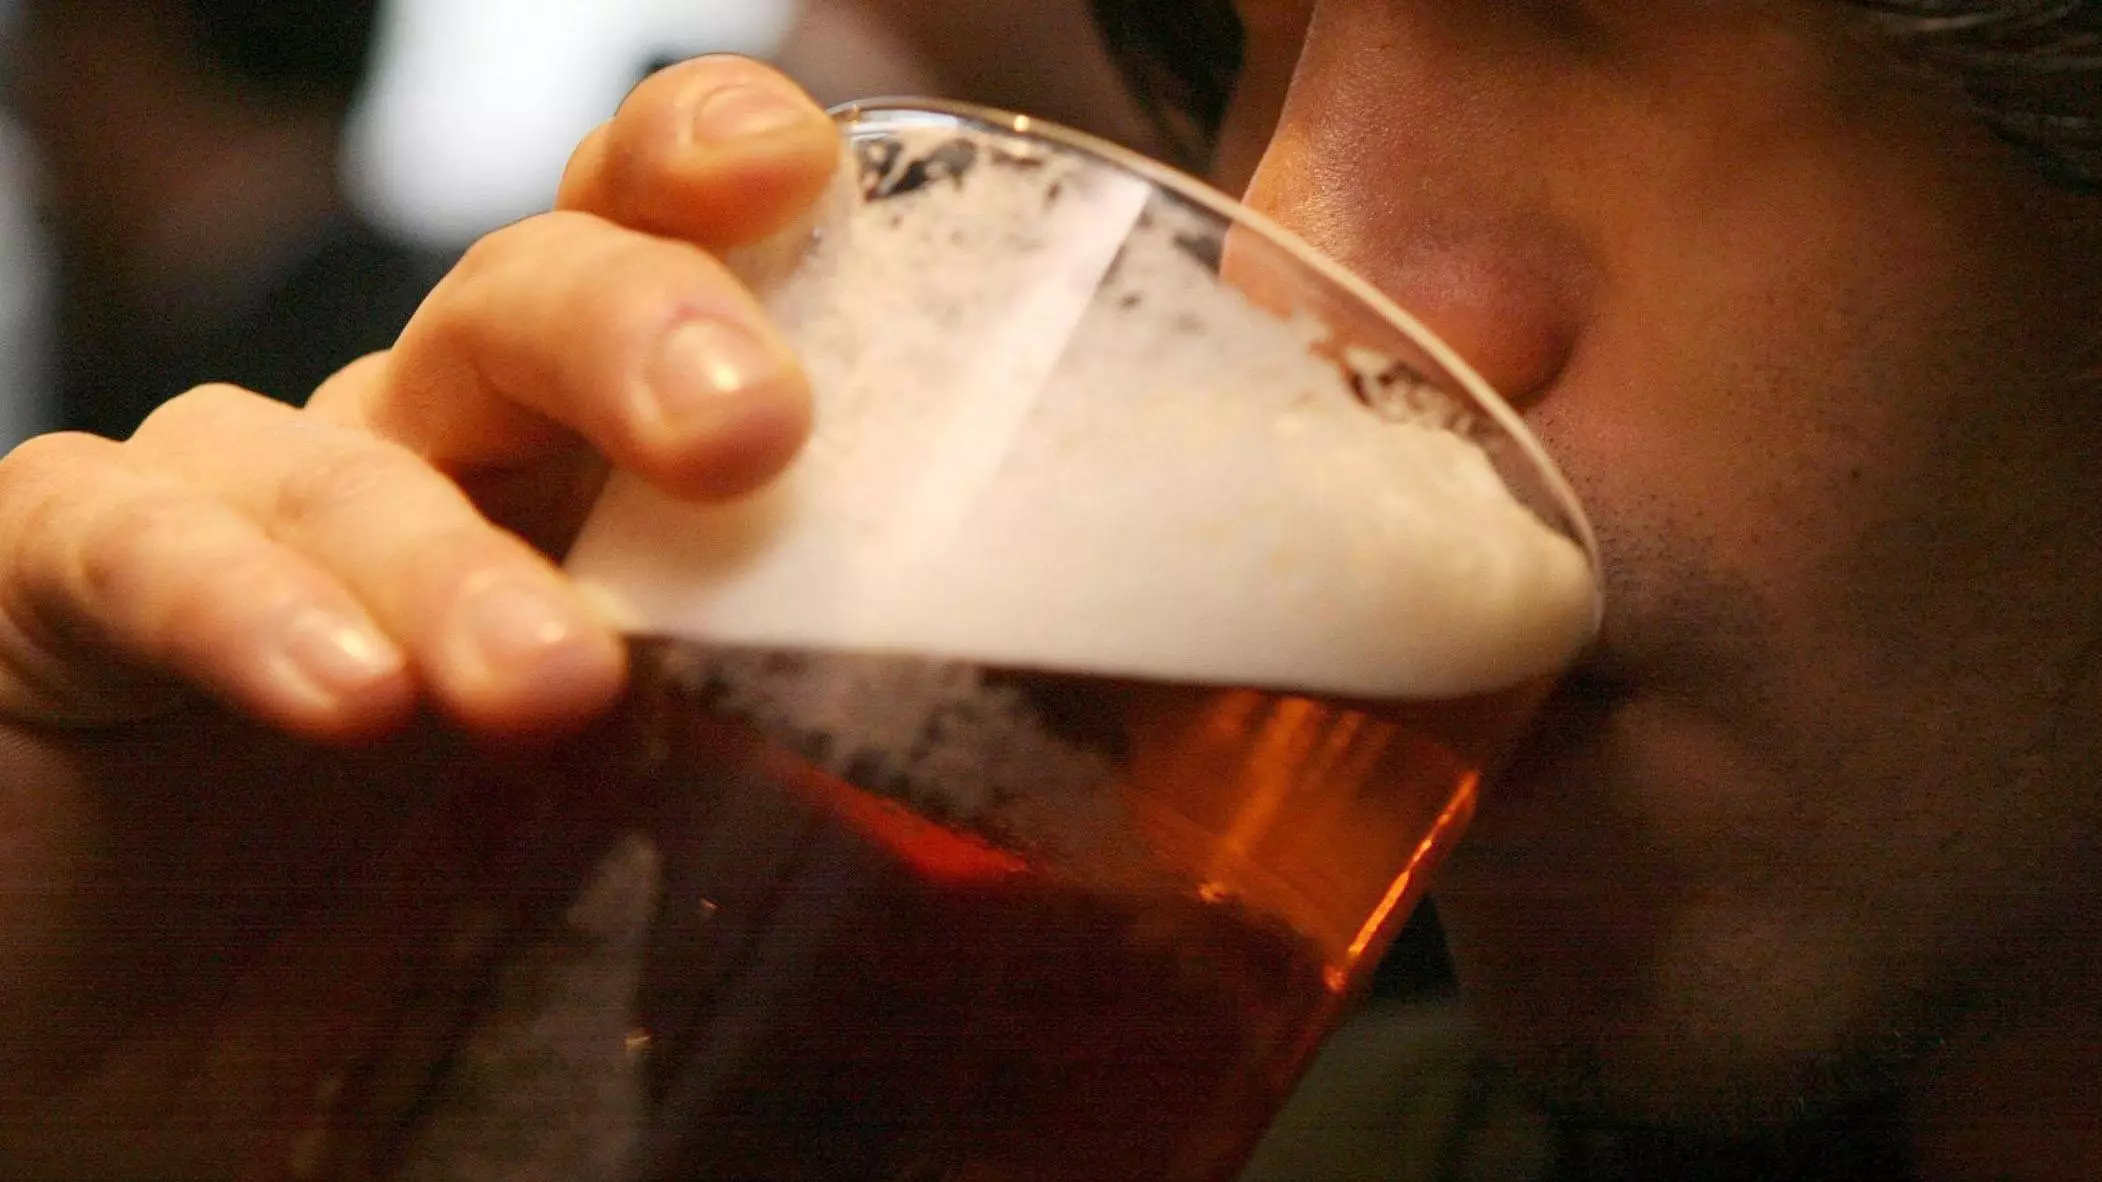 UK Prime Minister Warns Pubs Might Force Drinkers To Prove They've Been Vaccinated